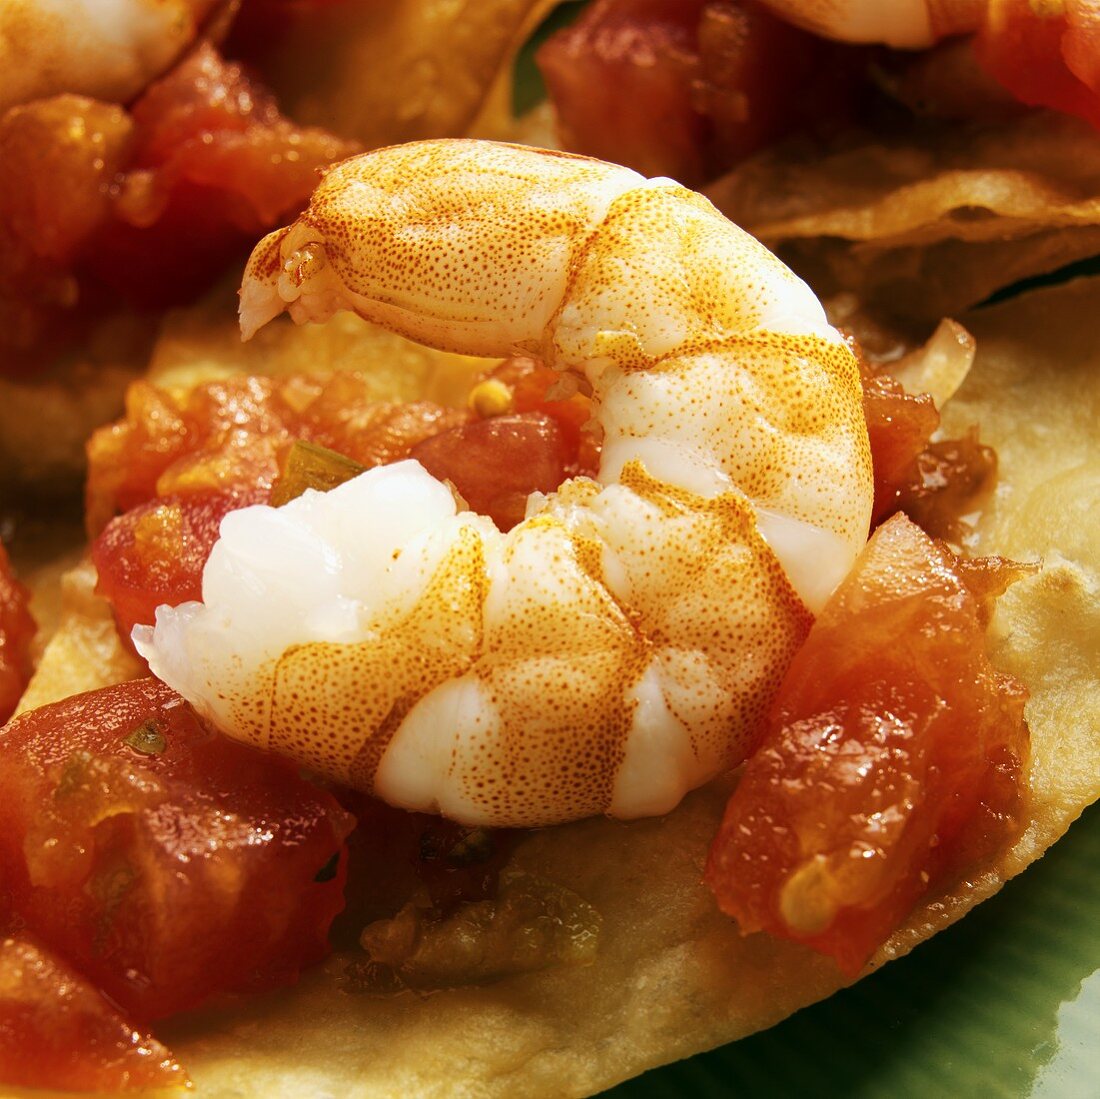 Shrimps and tomato salsa on tortilla chips (close-up)